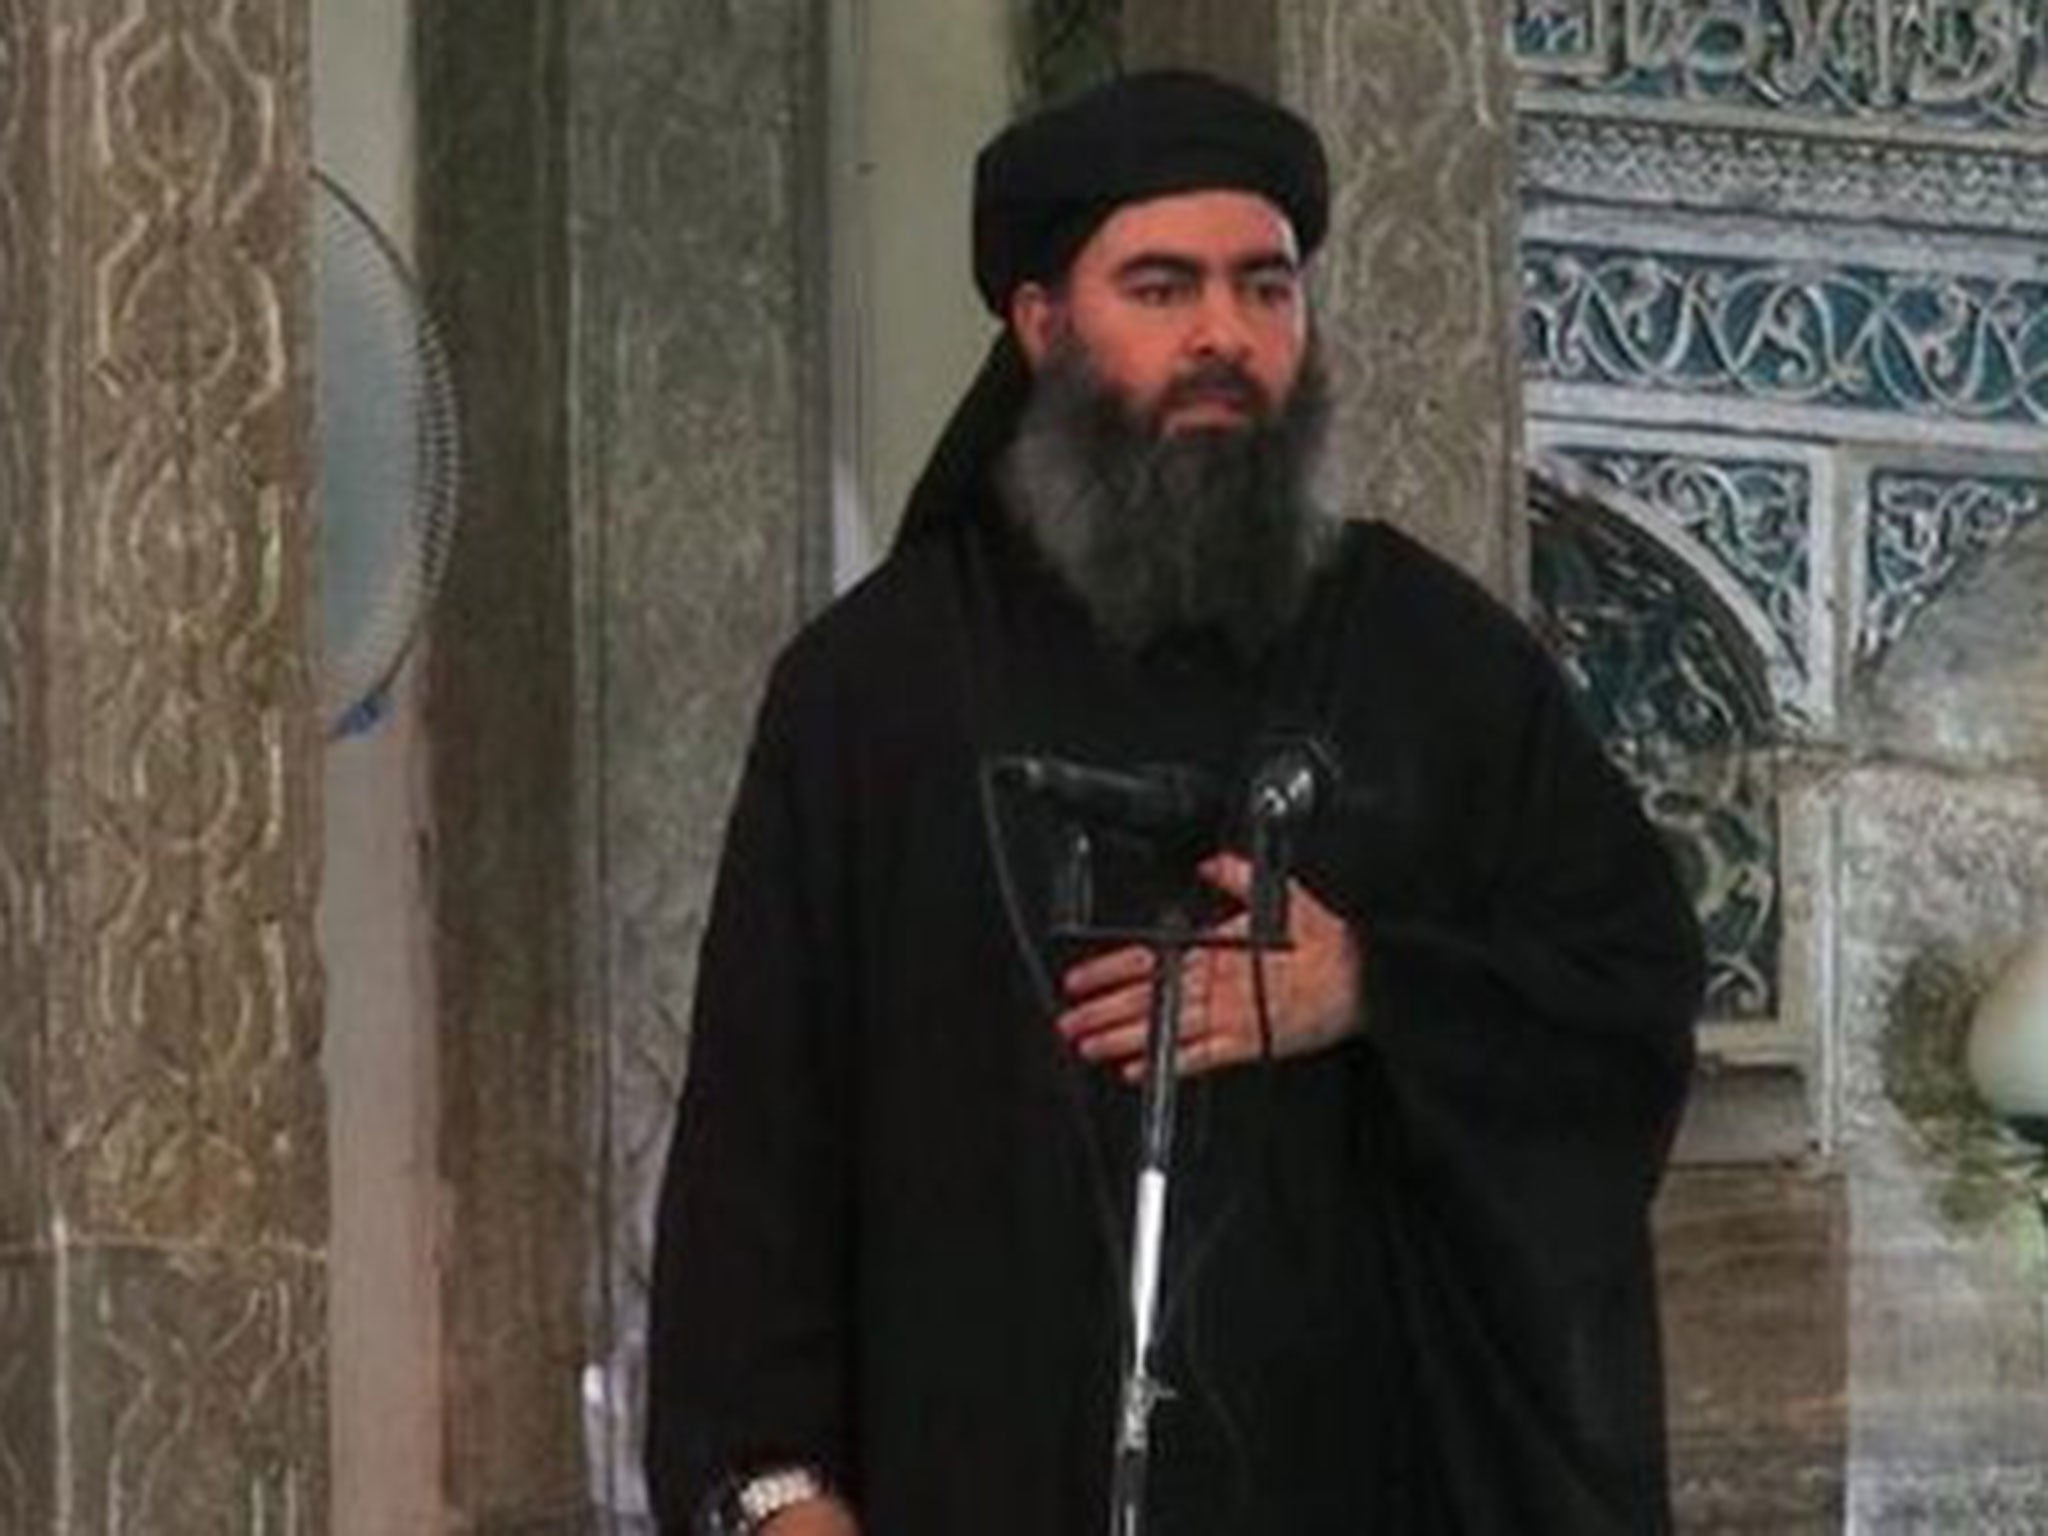 Abu Bakr al-Baghdadi made his first appearance on video when he gave a sermon in Mosul in July